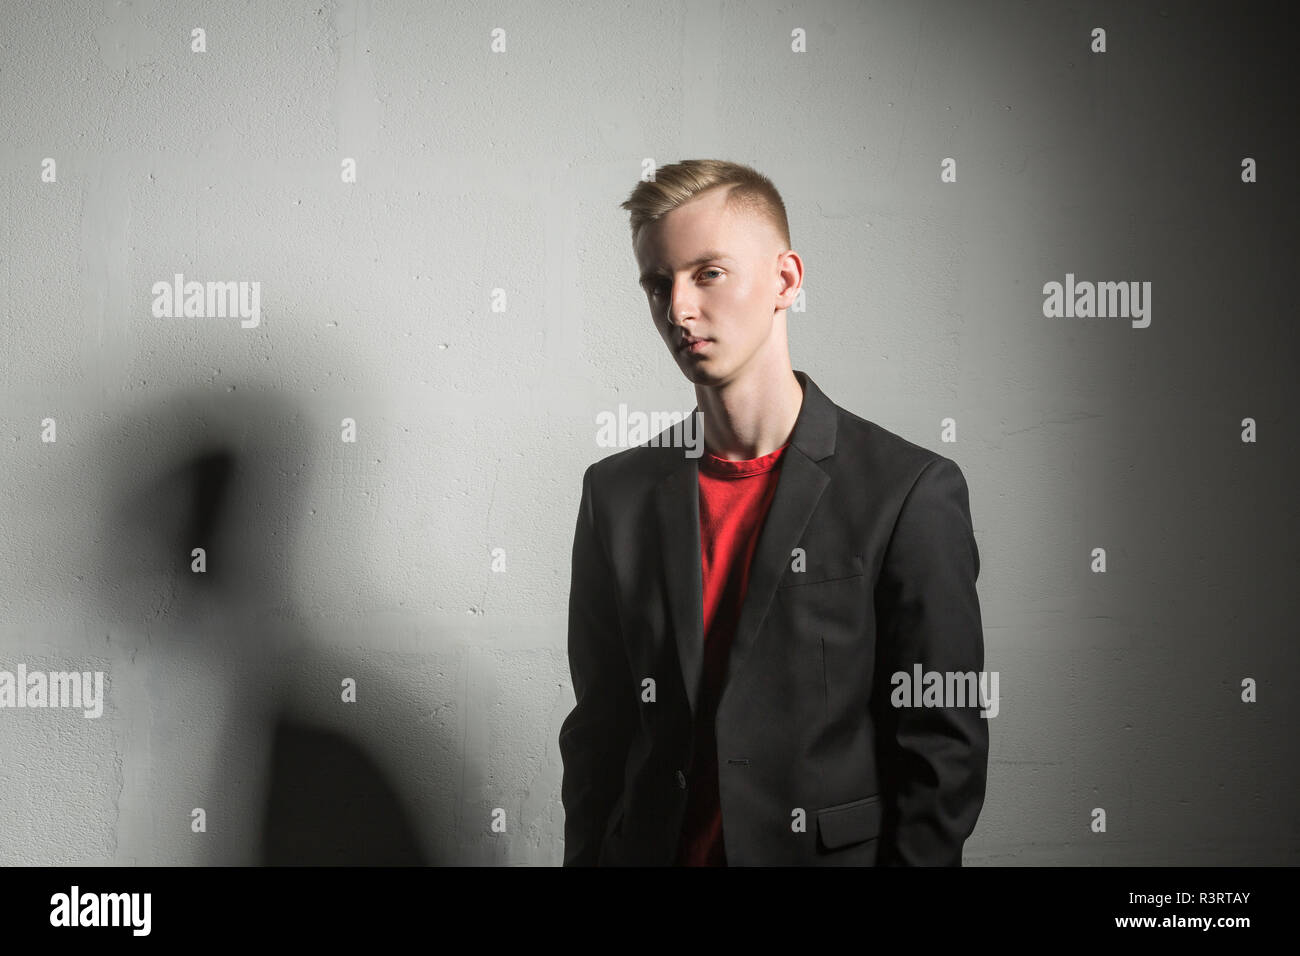 Portrait of serious young man wearing black suit coat and red t-shirt Stock Photo